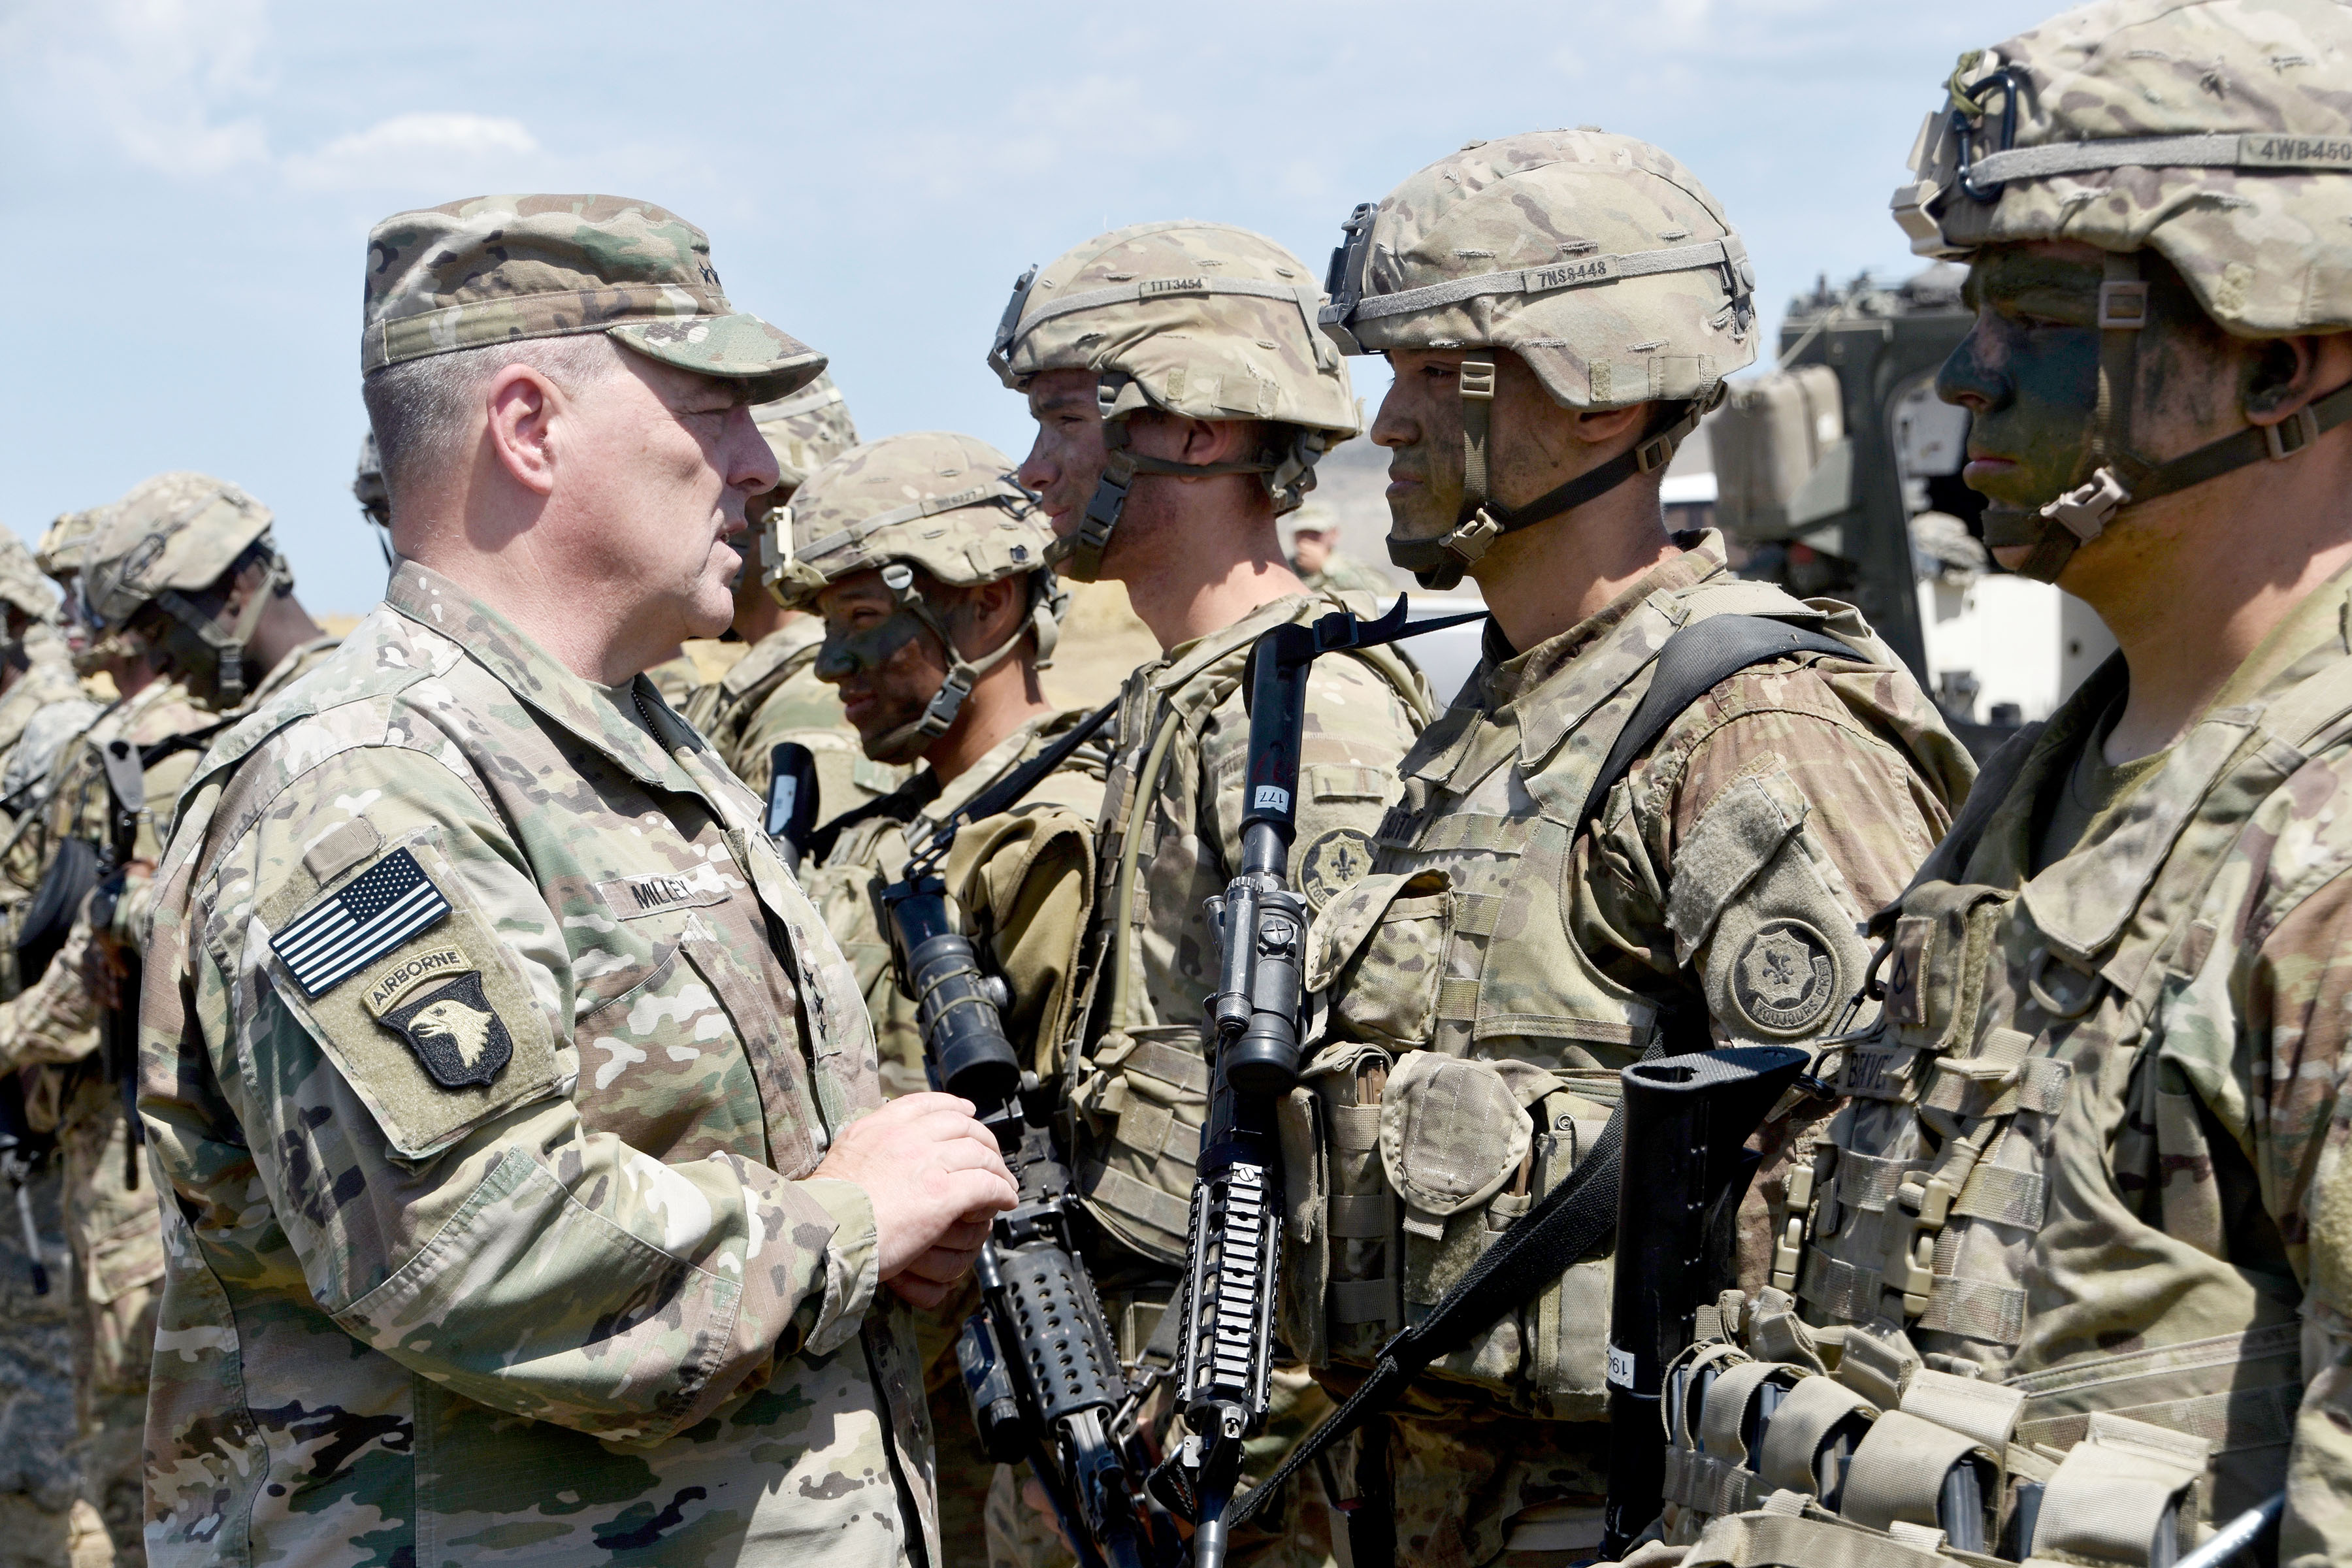 Gen. Mark A. Milley, U.S. Army chief of staff, hands out coins Aug. 10 to Soldiers assigned to 2nd Cavalry Regiment during Exercise Noble Partner 2017 in Vaziani, Georgia. Noble Partner is designed to prepare the Georgian military for its contribution to the NATO Response Force. Milley’s emphasis on readiness as the Army’s No. 1 priority has sparked far-reaching conversation on what readiness is and how it can be achieved. (Photo by Capt. Judith Marlowe, 2nd Cavalry Regiment)